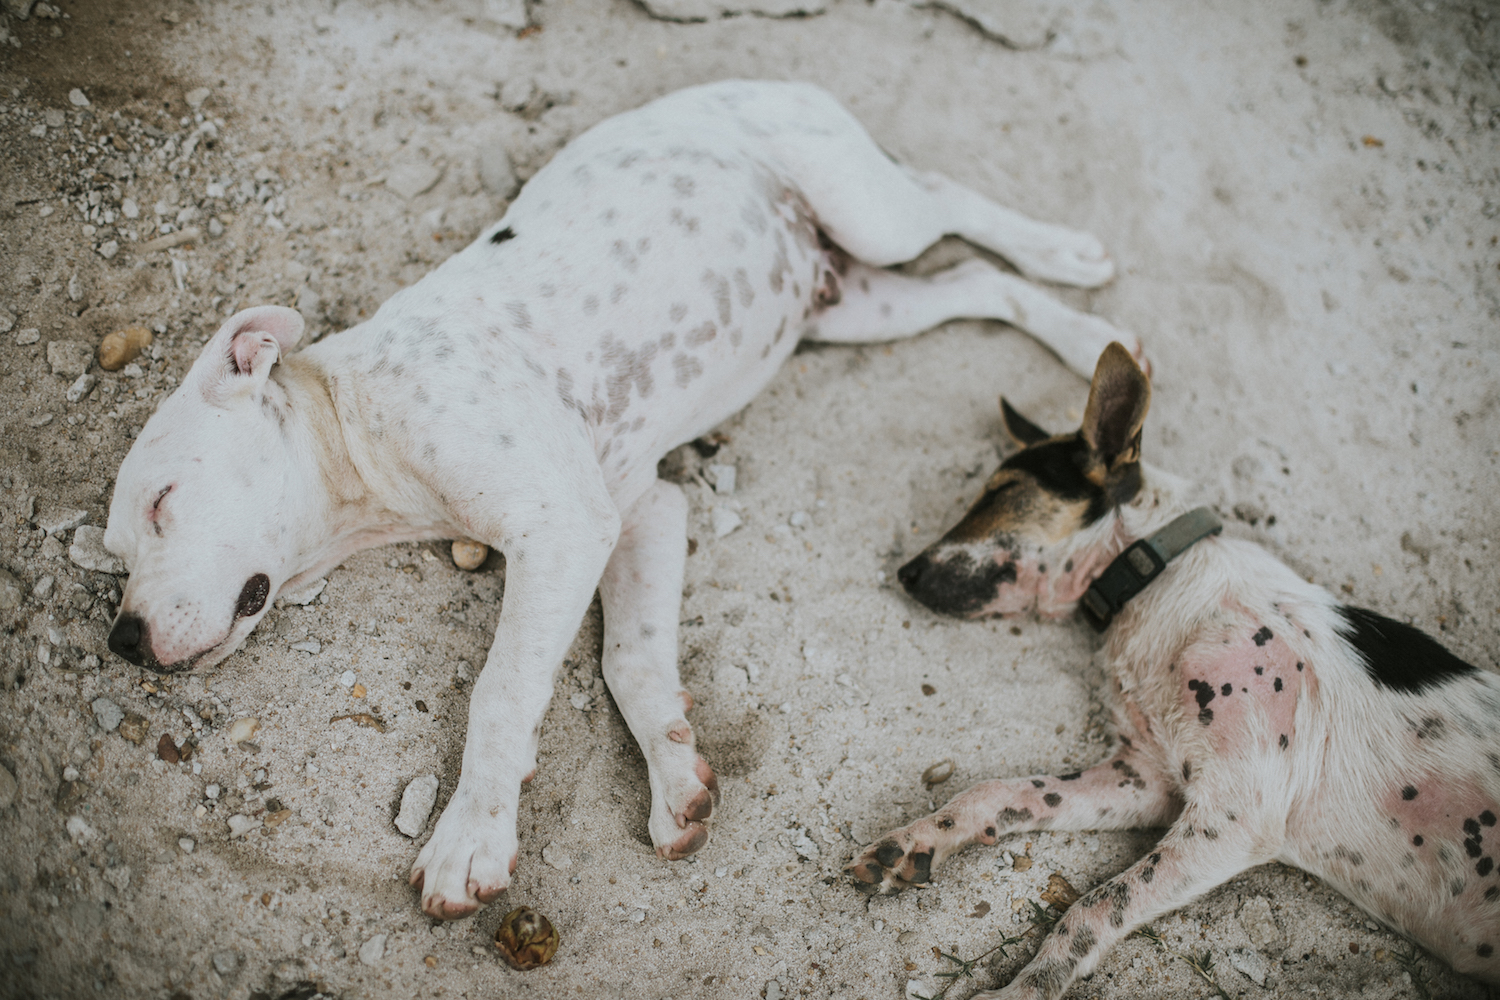  Local dogs, Hercules, left,&nbsp;and Survival, right, nap on the property of Gales Point Manatee Lodge in Belize. Dogs are very common in this area because there are not many resources for spaying and neutering.&nbsp;They are most often used to prot